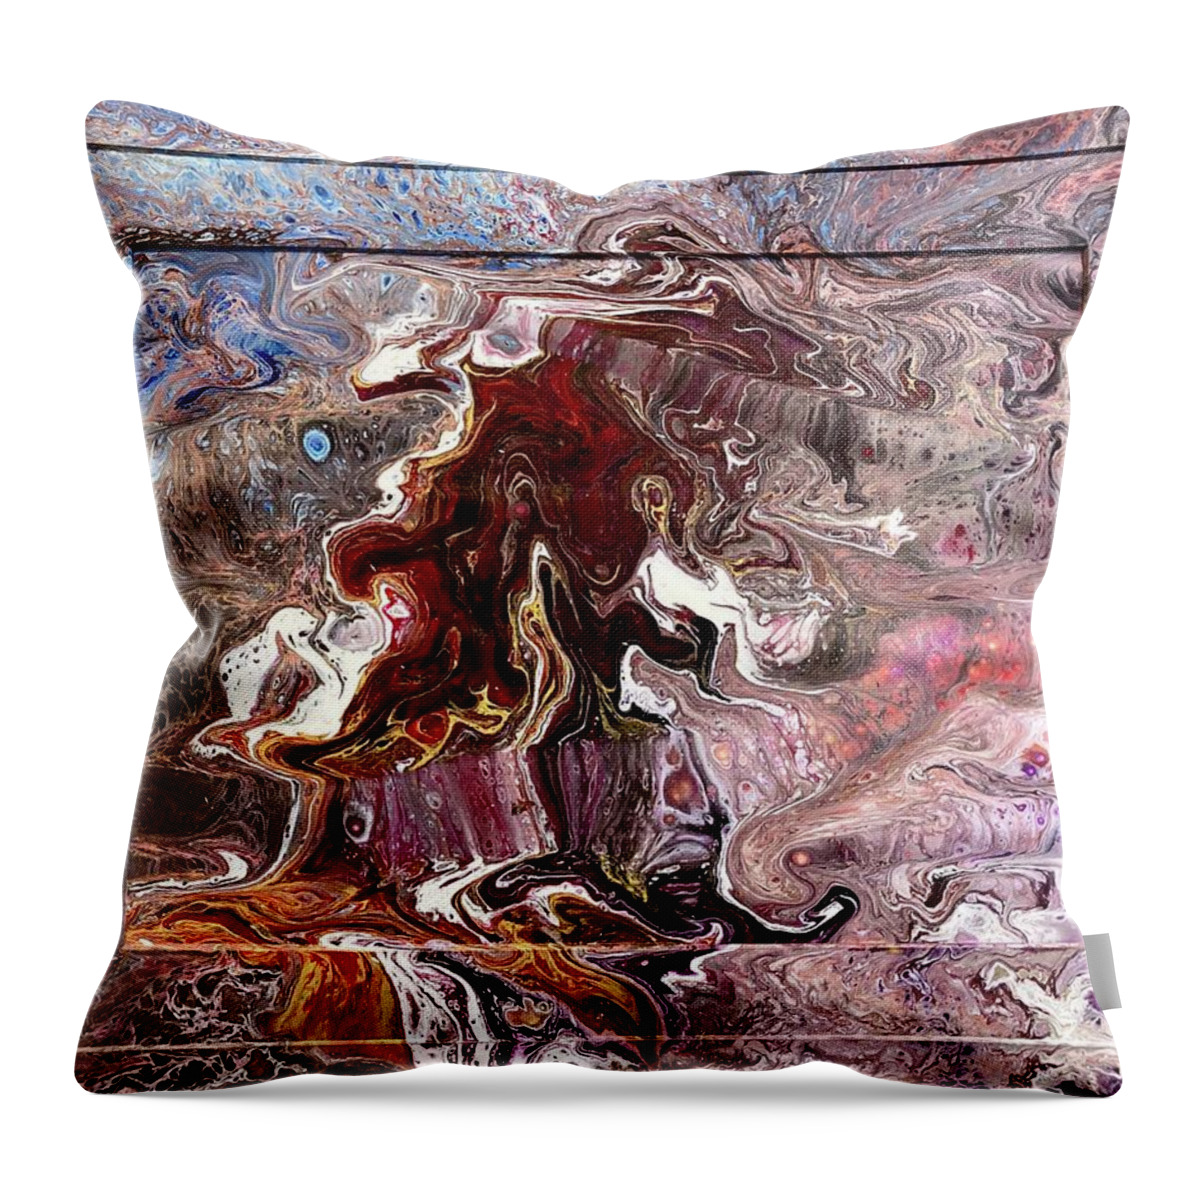 Acrylic Pour Throw Pillow featuring the painting Lion's Mouth by David Euler